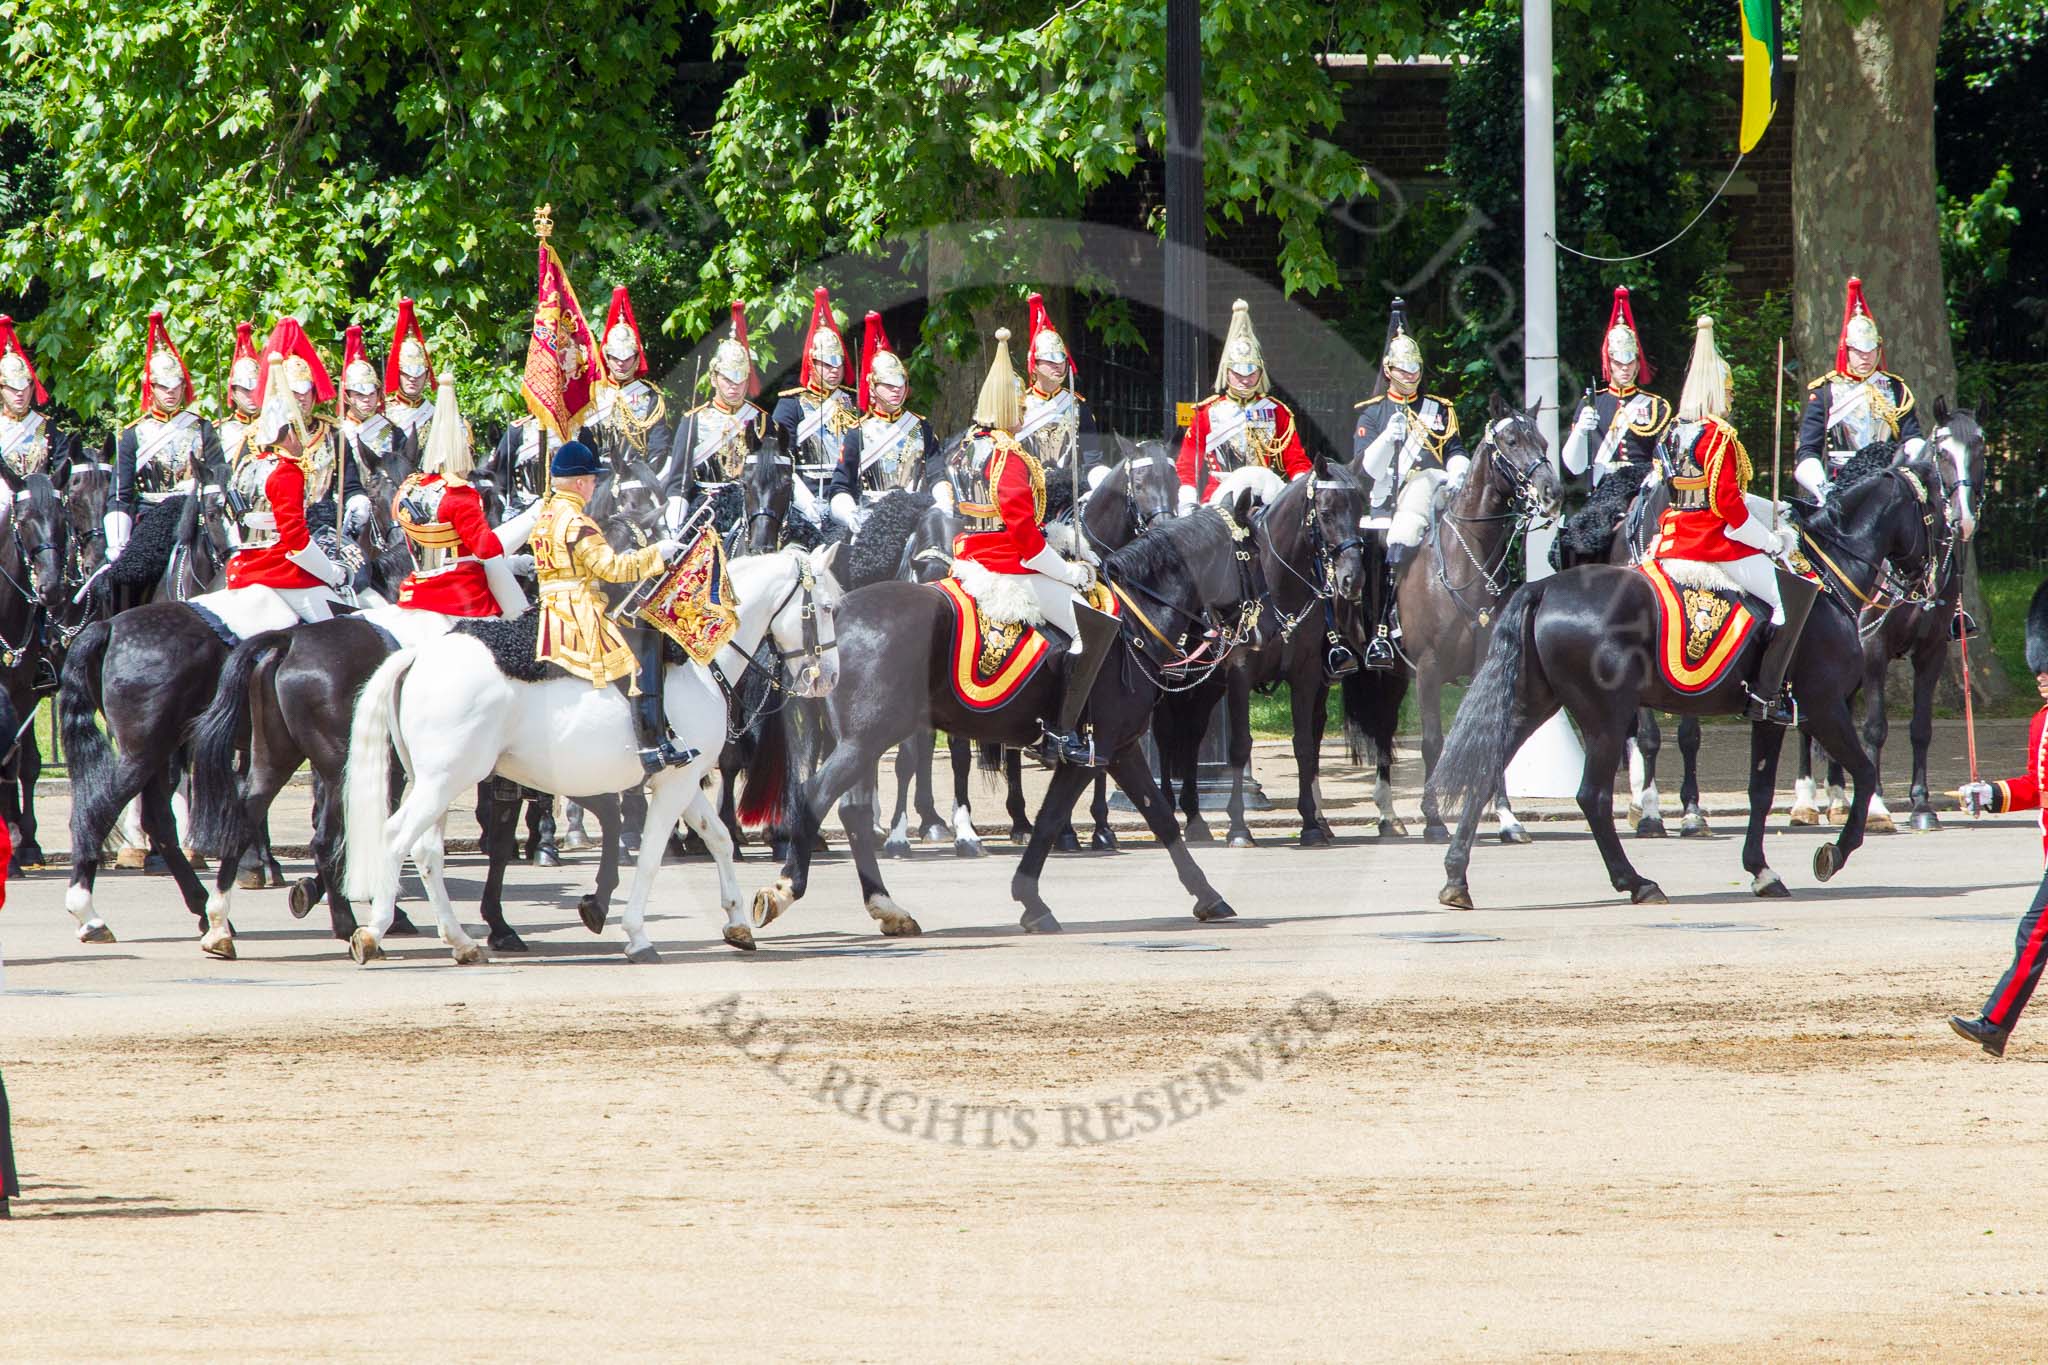 Trooping the Colour 2013: The Household Cavalry is marching off, led by the Field Officer of the Escort, Major Nick Stewart, The Life Guards, followed by the Trumpeter, Standard Bearer, and Standard Coverer. Image #777, 15 June 2013 12:06 Horse Guards Parade, London, UK